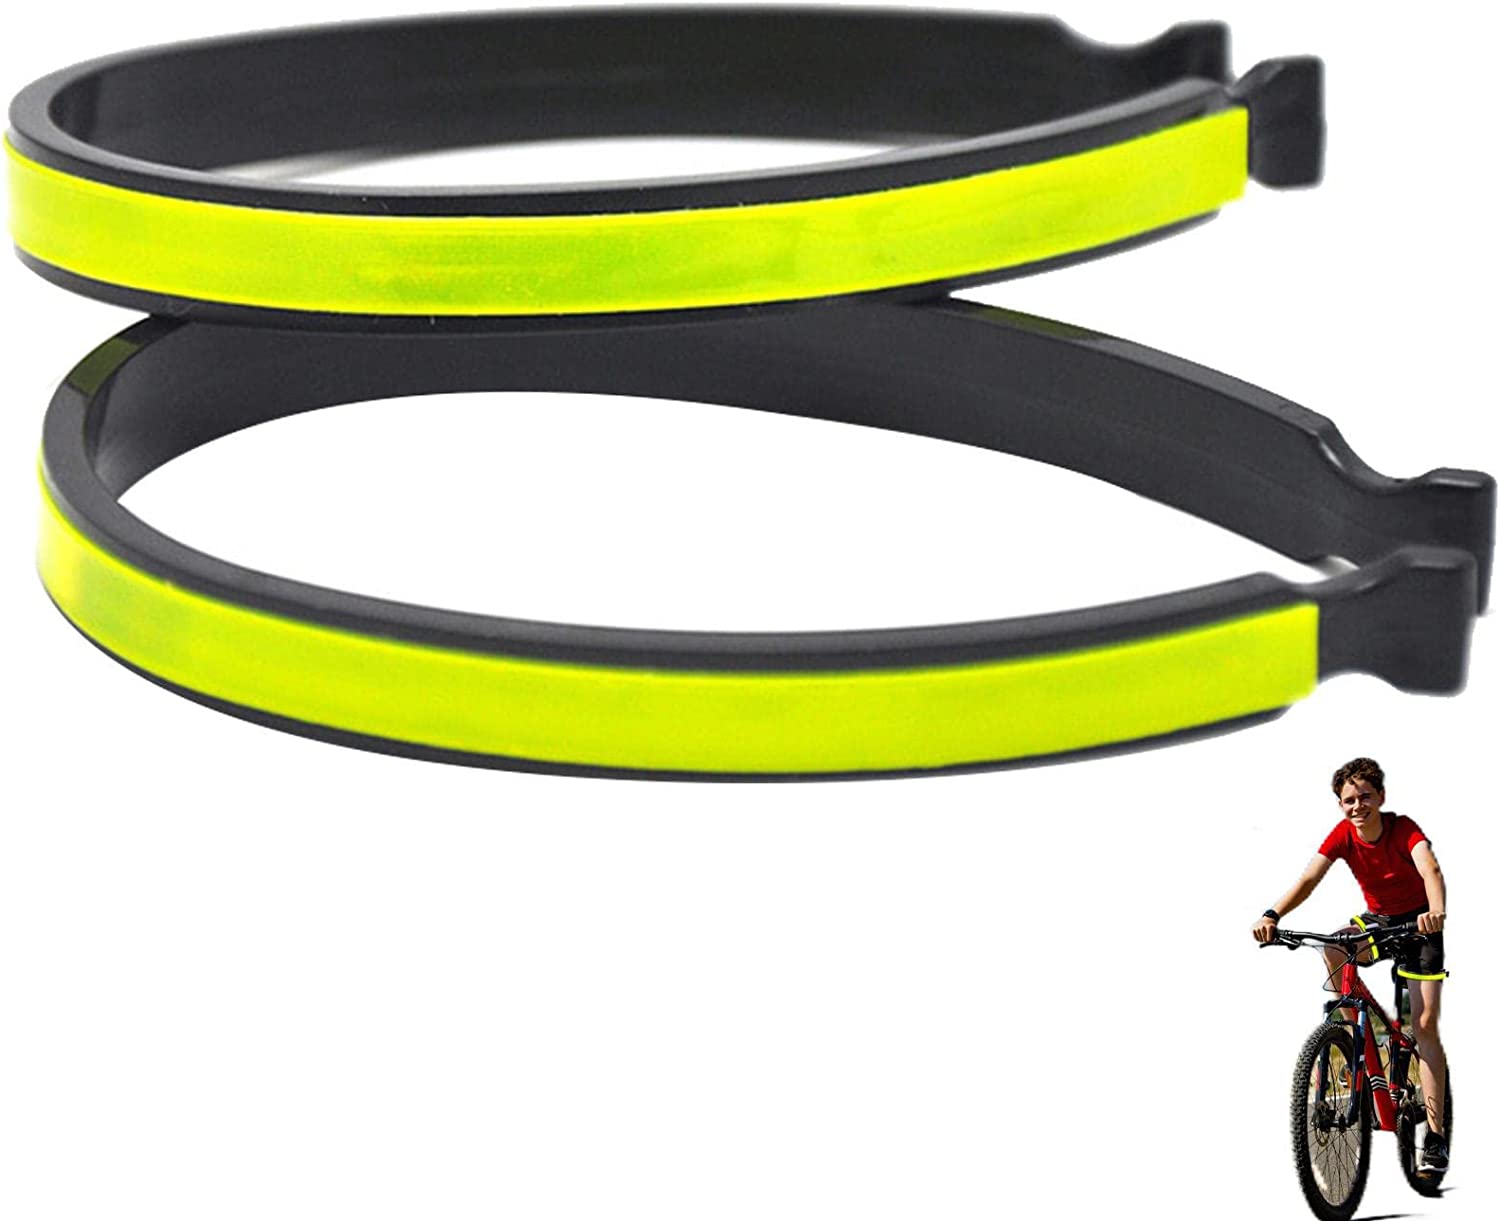 Cycling Trouser Clip 100 - Yellow |₹259/- |Agamya Store